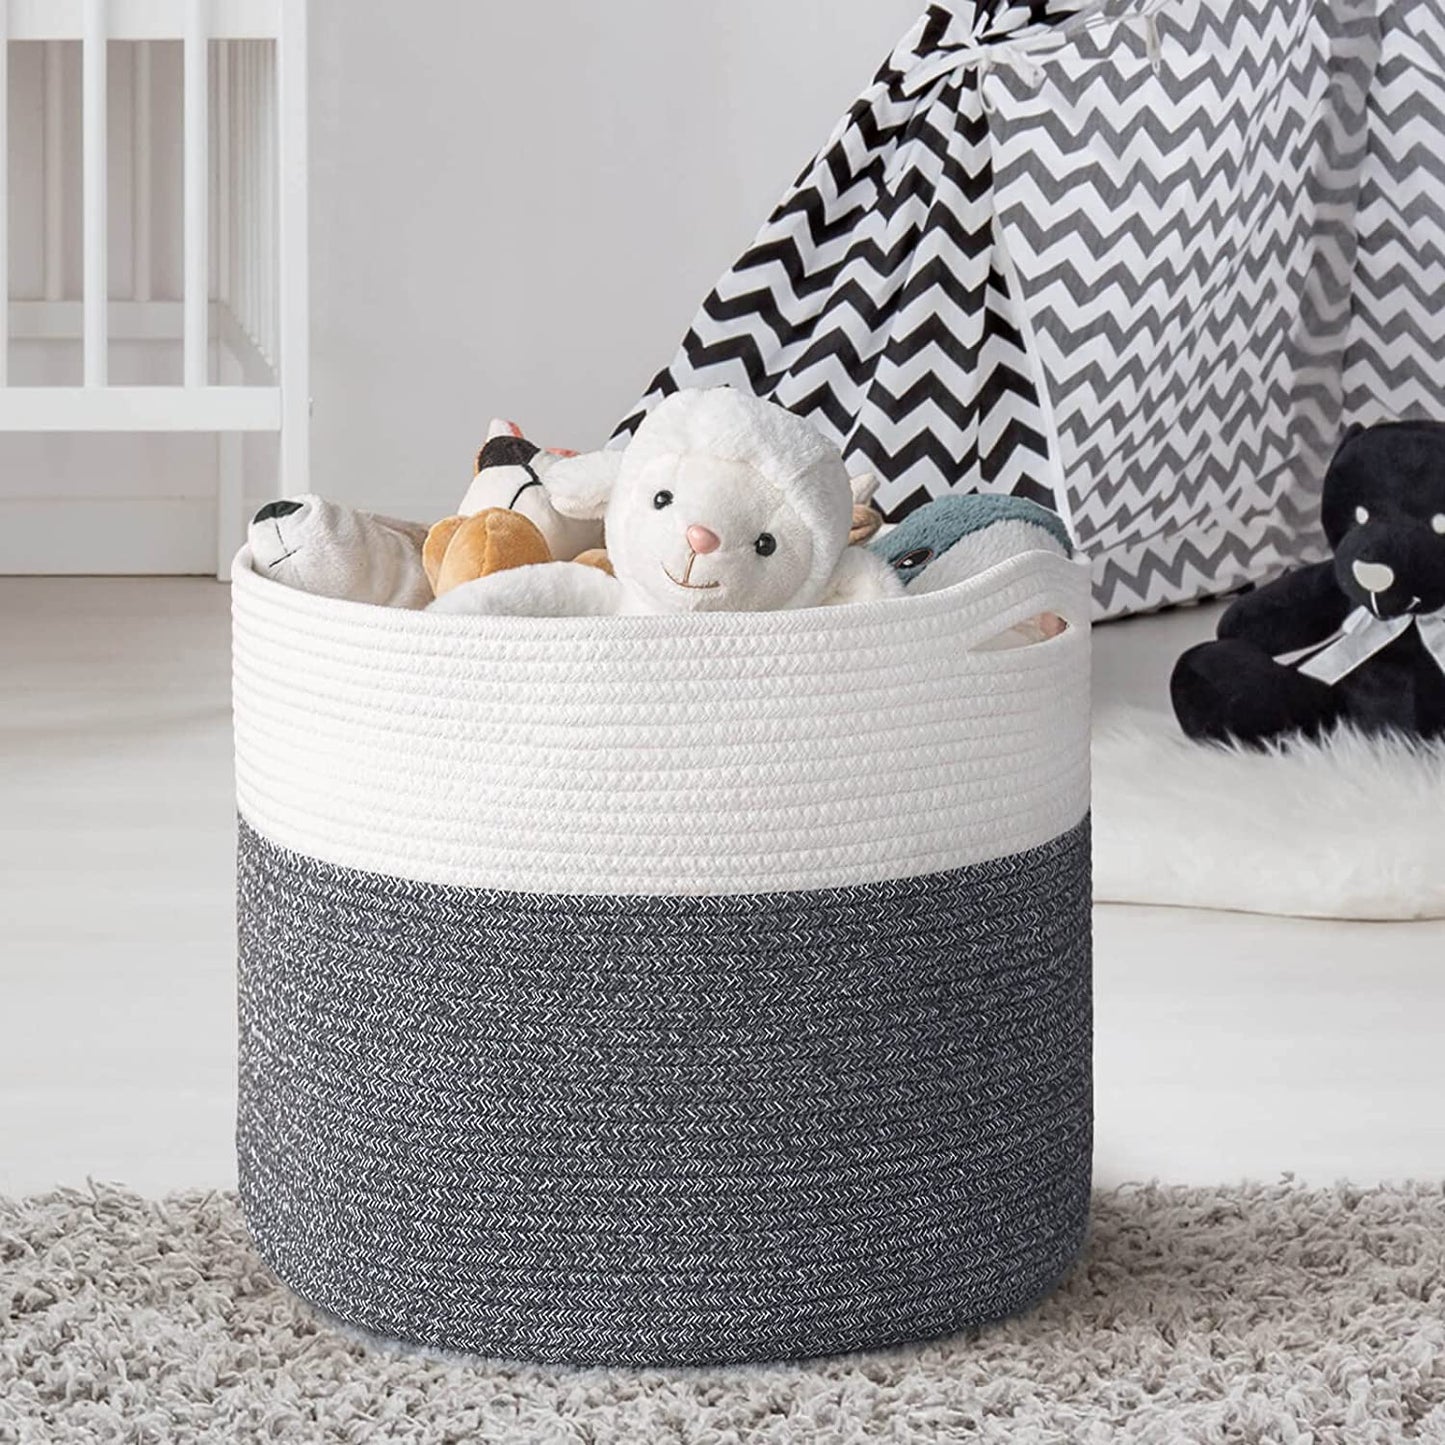 Gray and White Rope Basket, Large - 15.8"x15.8"x13.8"